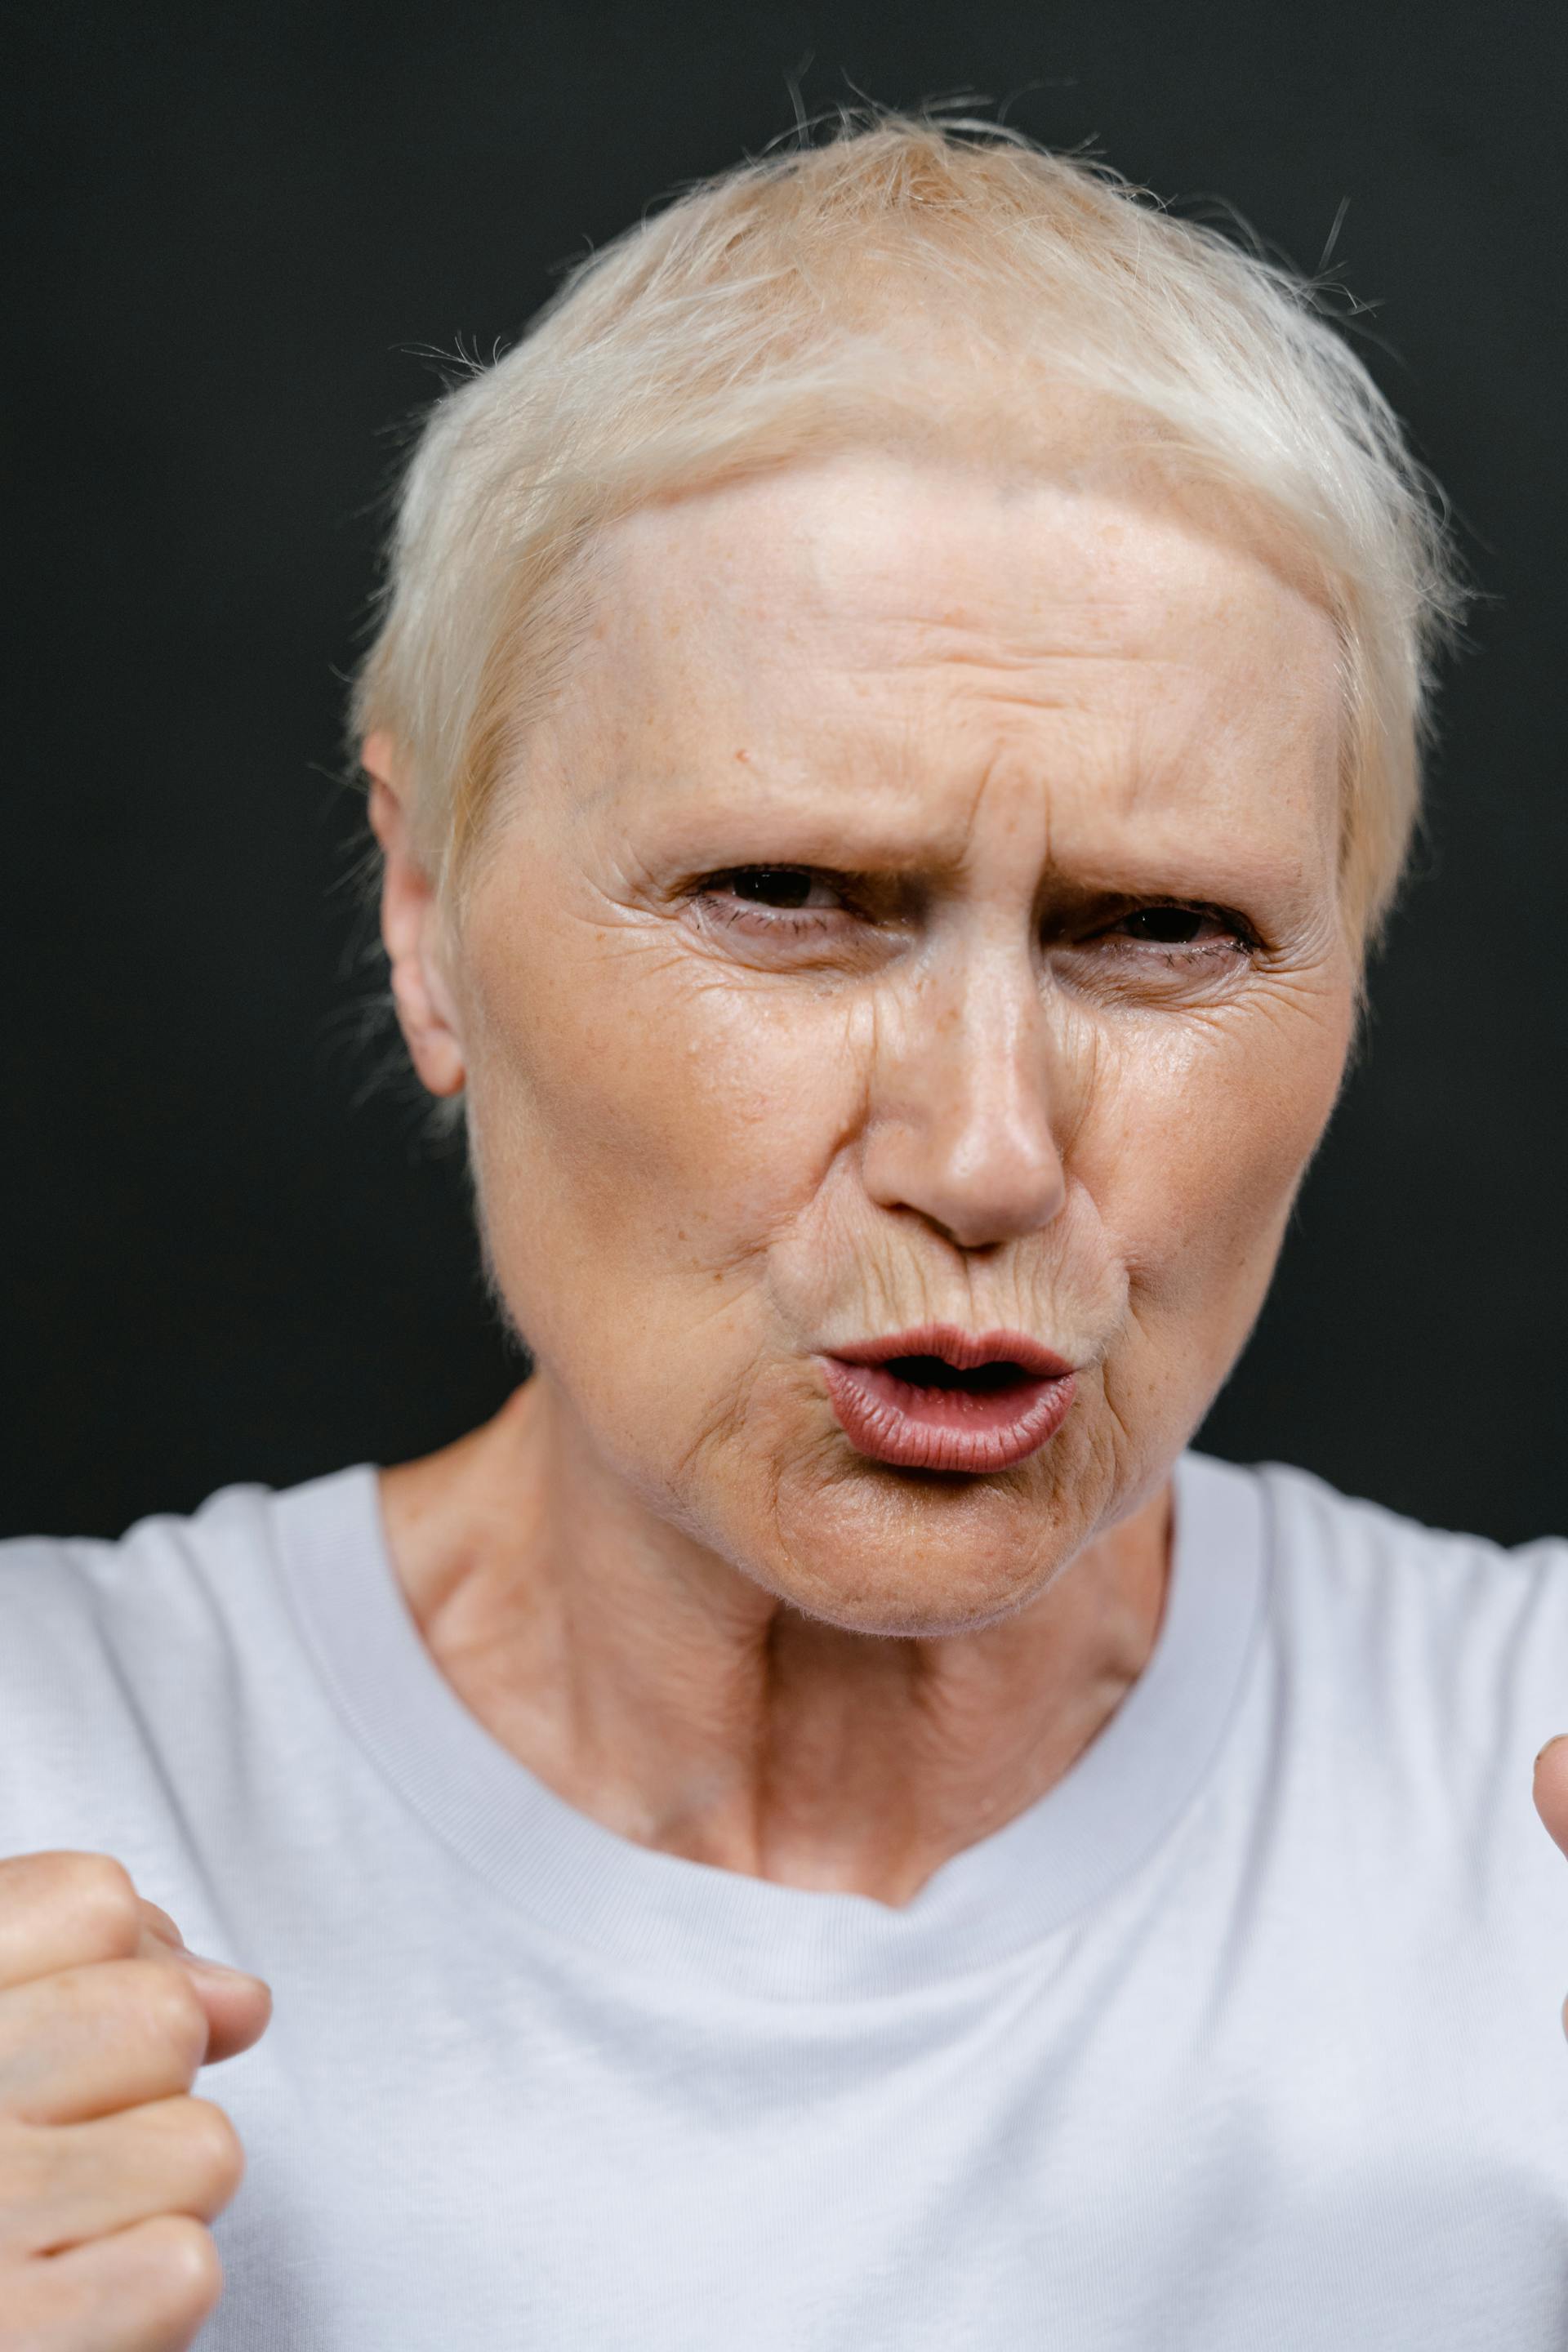 A close-up of a senior woman looking angry | Source: Pexels